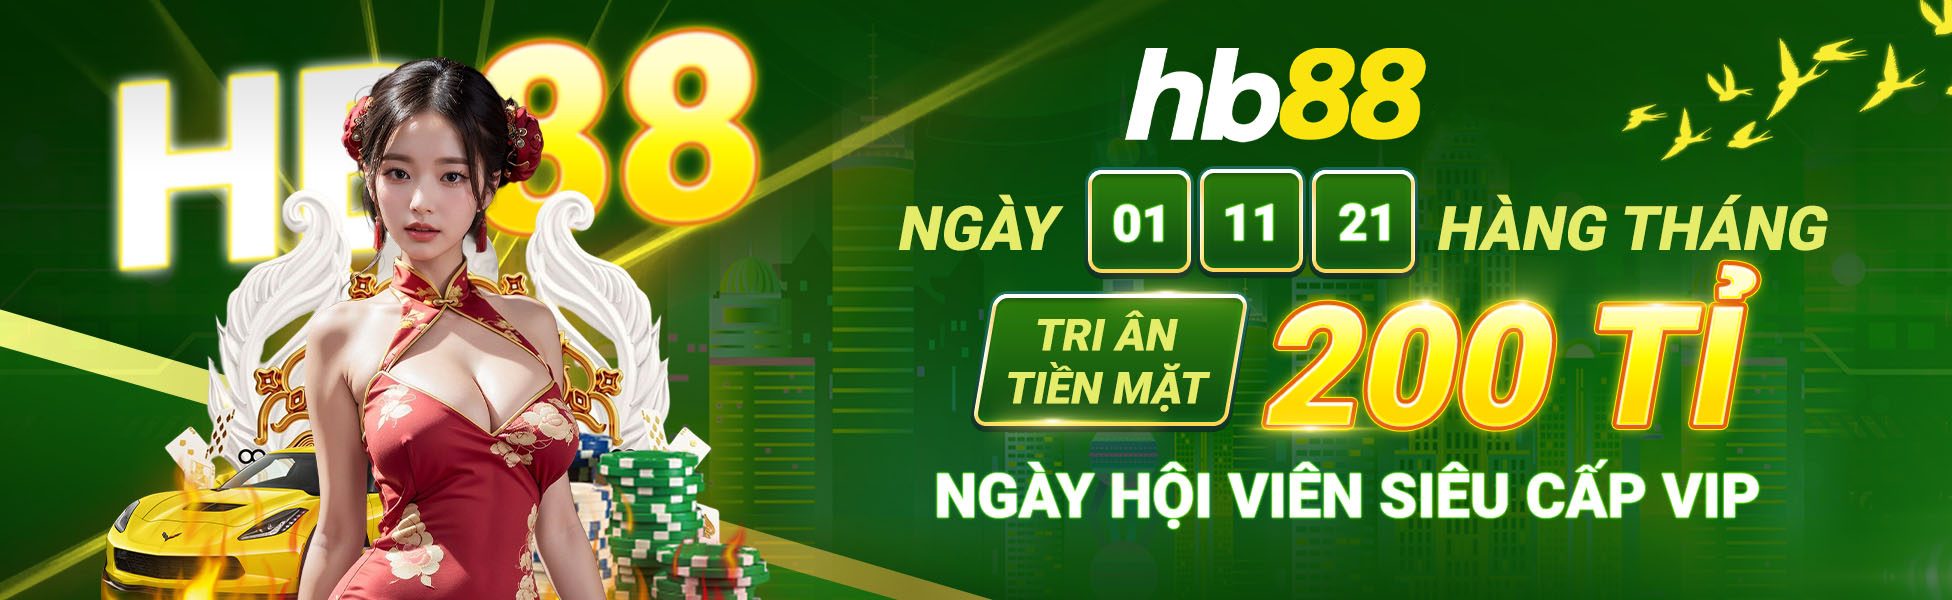 Hb88 Tours Cover Image